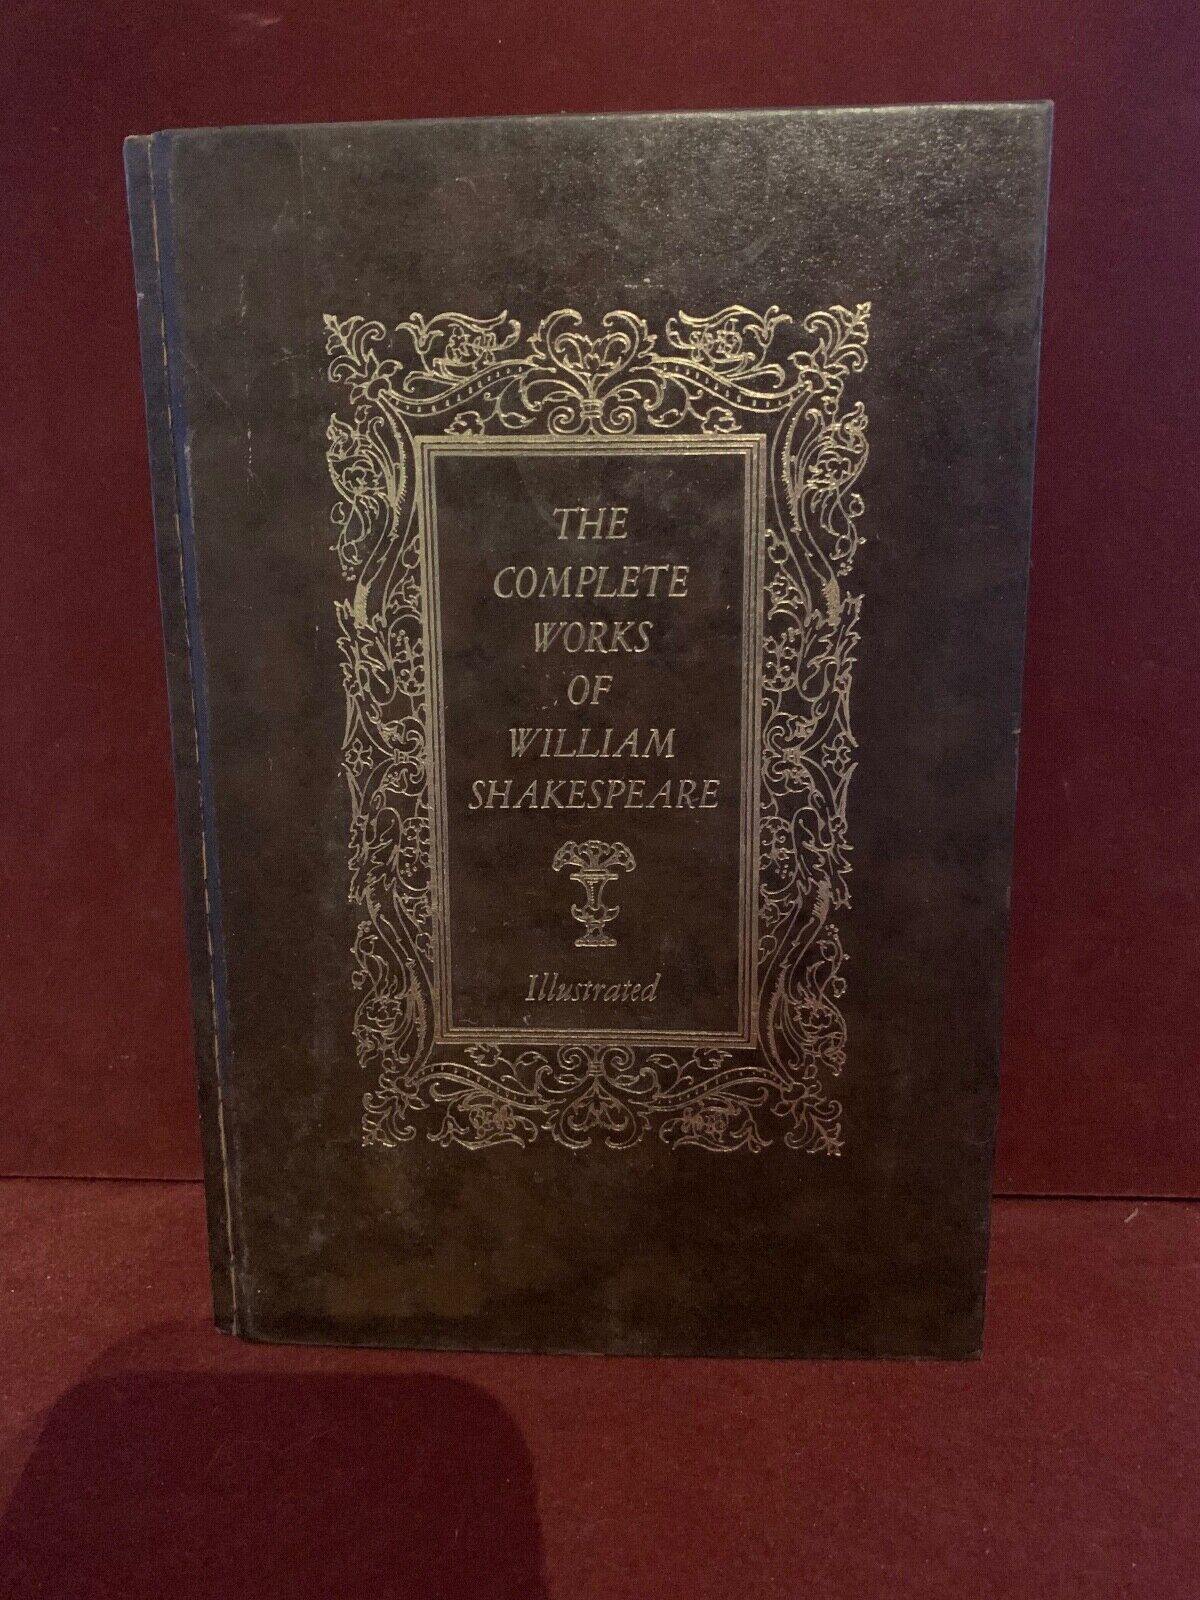 The Complete Works of William Shakespeare 1975 HC | eBay